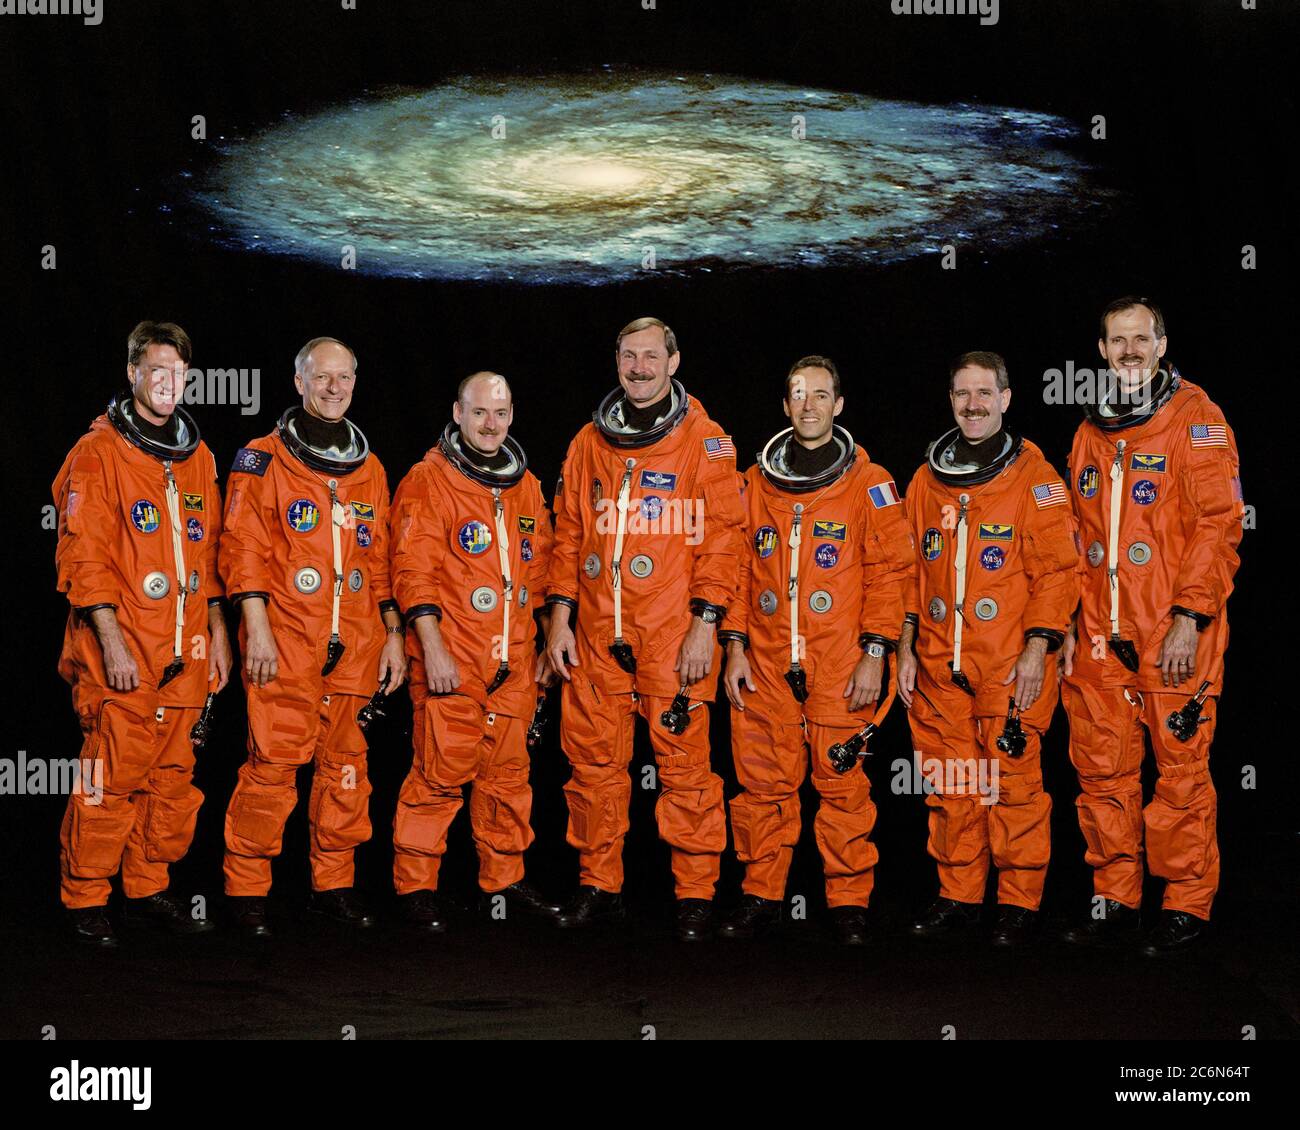 (August 1999) --- These seven astronauts have been assigned as crew members for NASA's third servicing mission to the Hubble Space Telescope (HST). They are, from the left, astronauts C. Michael Foale, Claude Nicollier, Scott J. Kelly, Curtis L. Brown, Jr., Jean-Francois Clervoy, John M. Grunsfeld and Steven L. Smith. Stock Photo